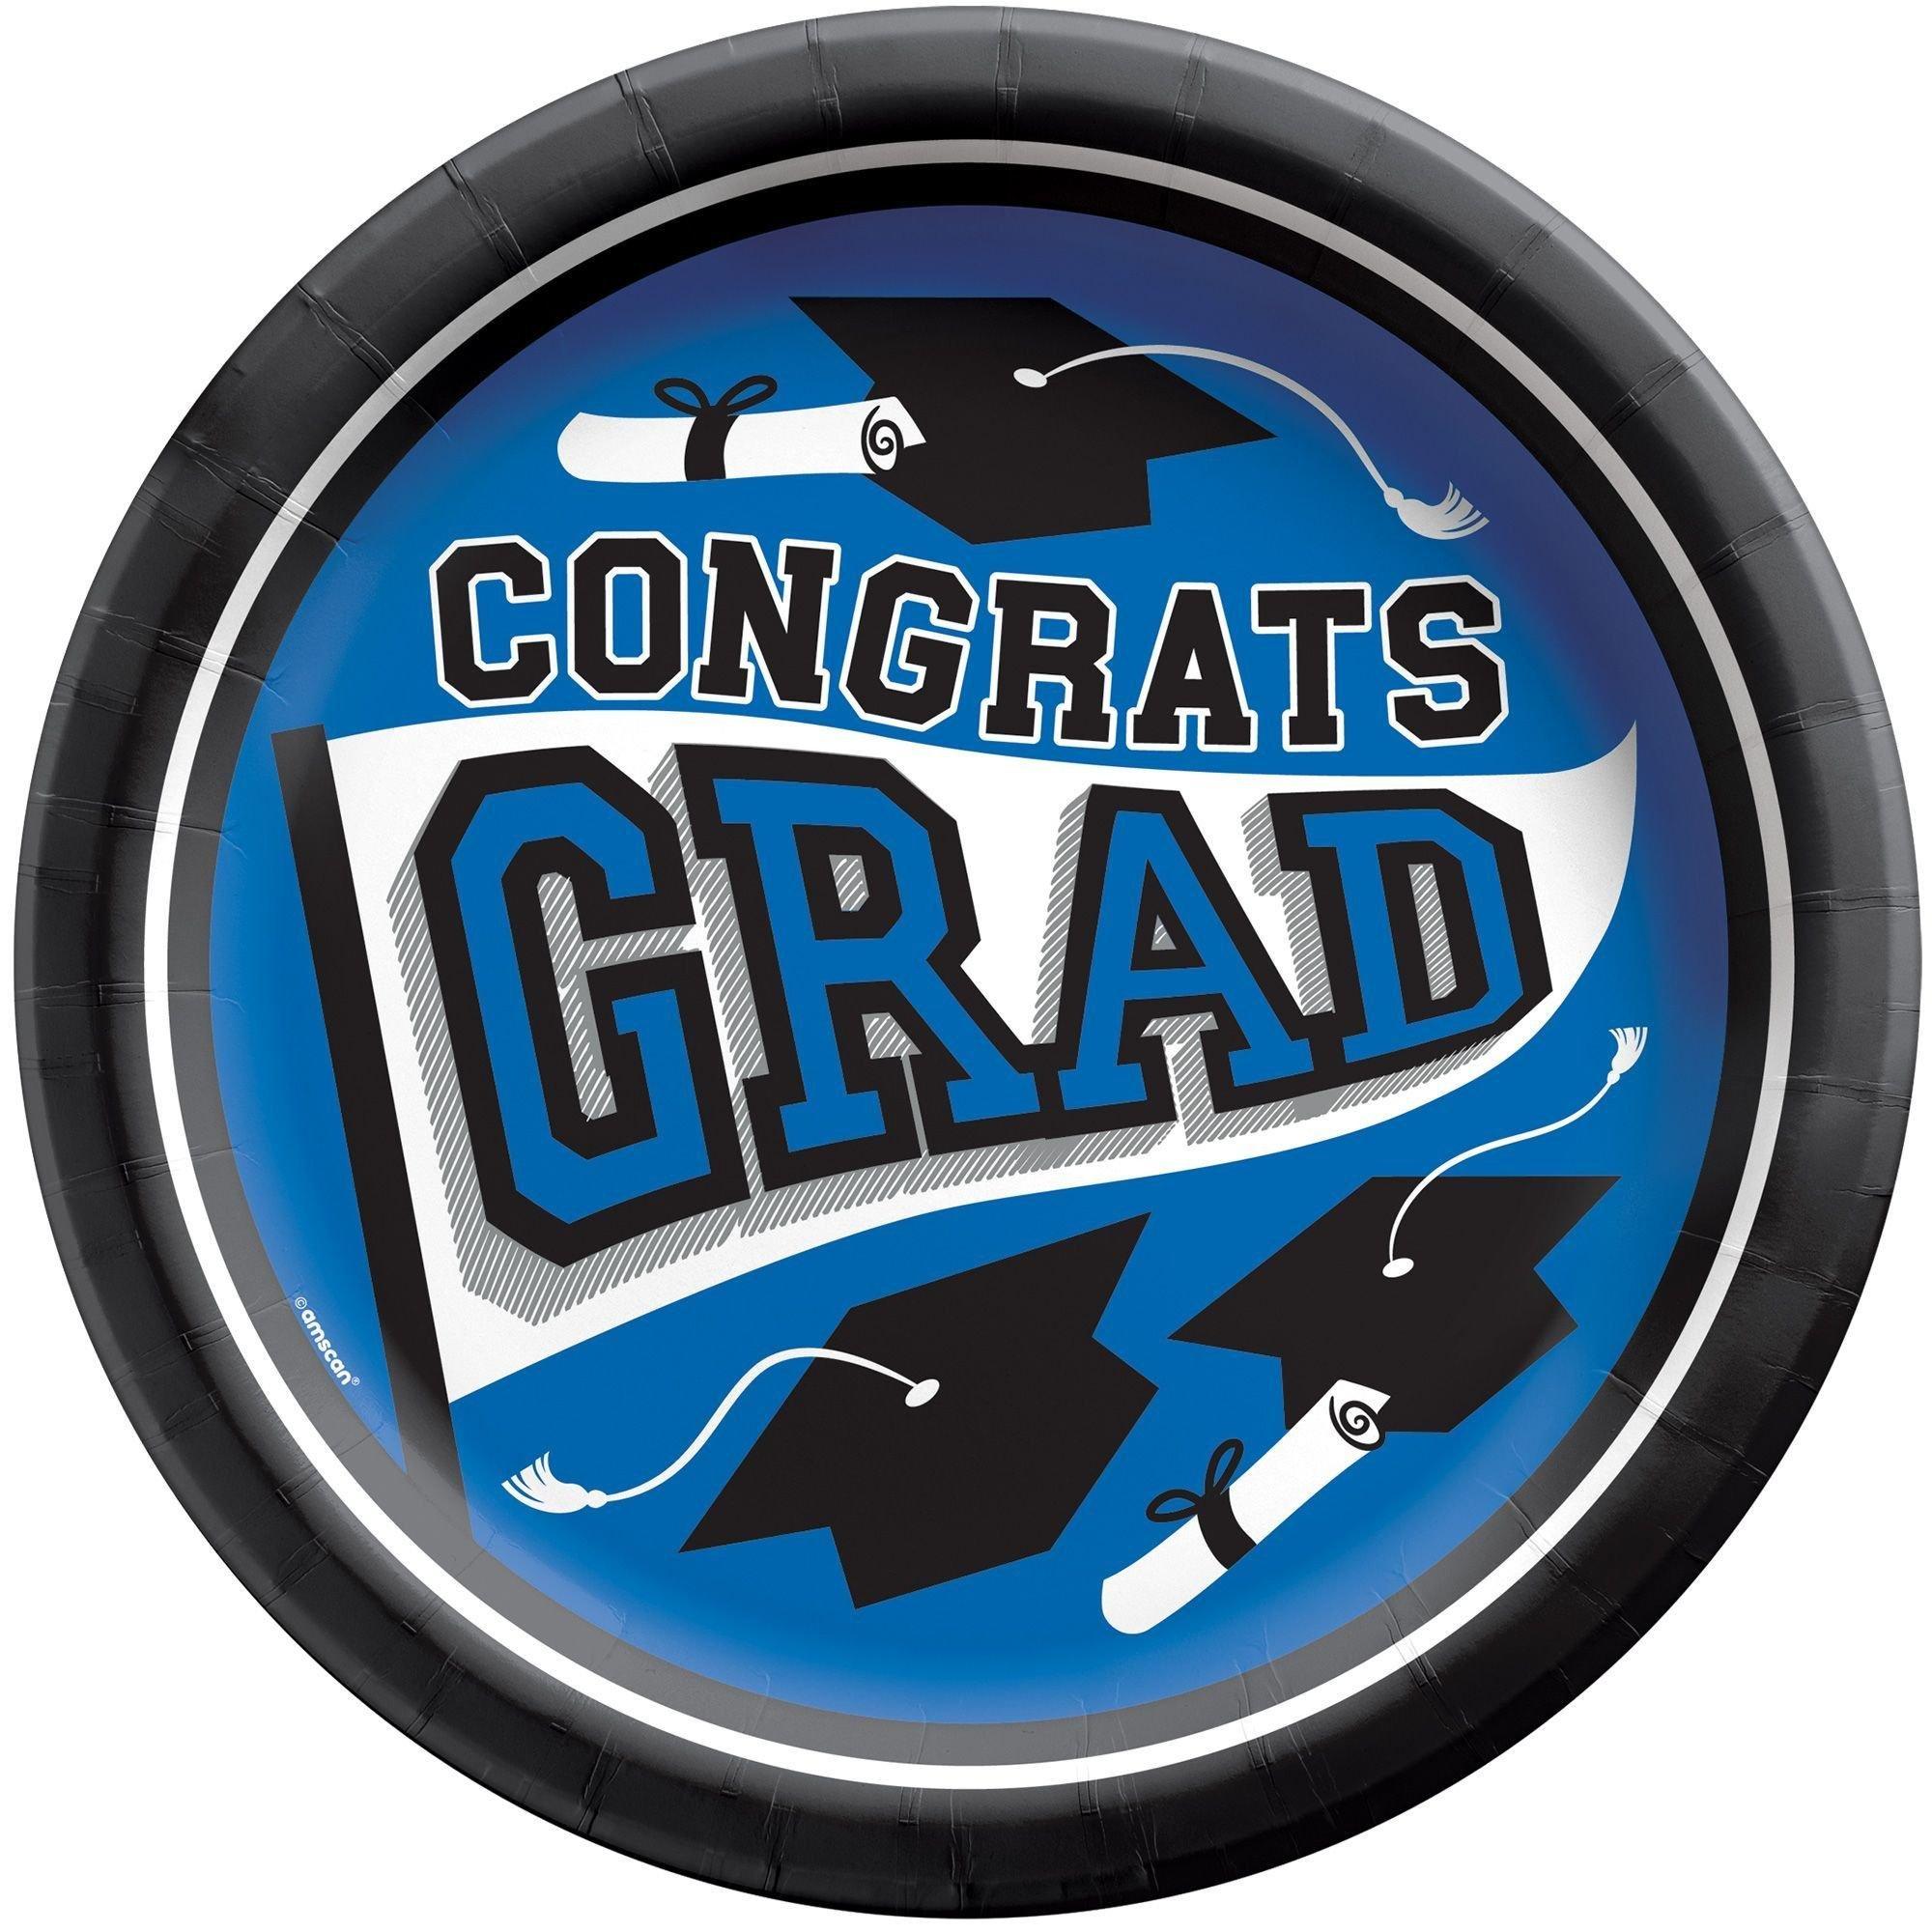 Graduation Party Supplies Kit for 40 with Decorations, Banners, Plates, Napkins, Cups - Blue Congrats Grad